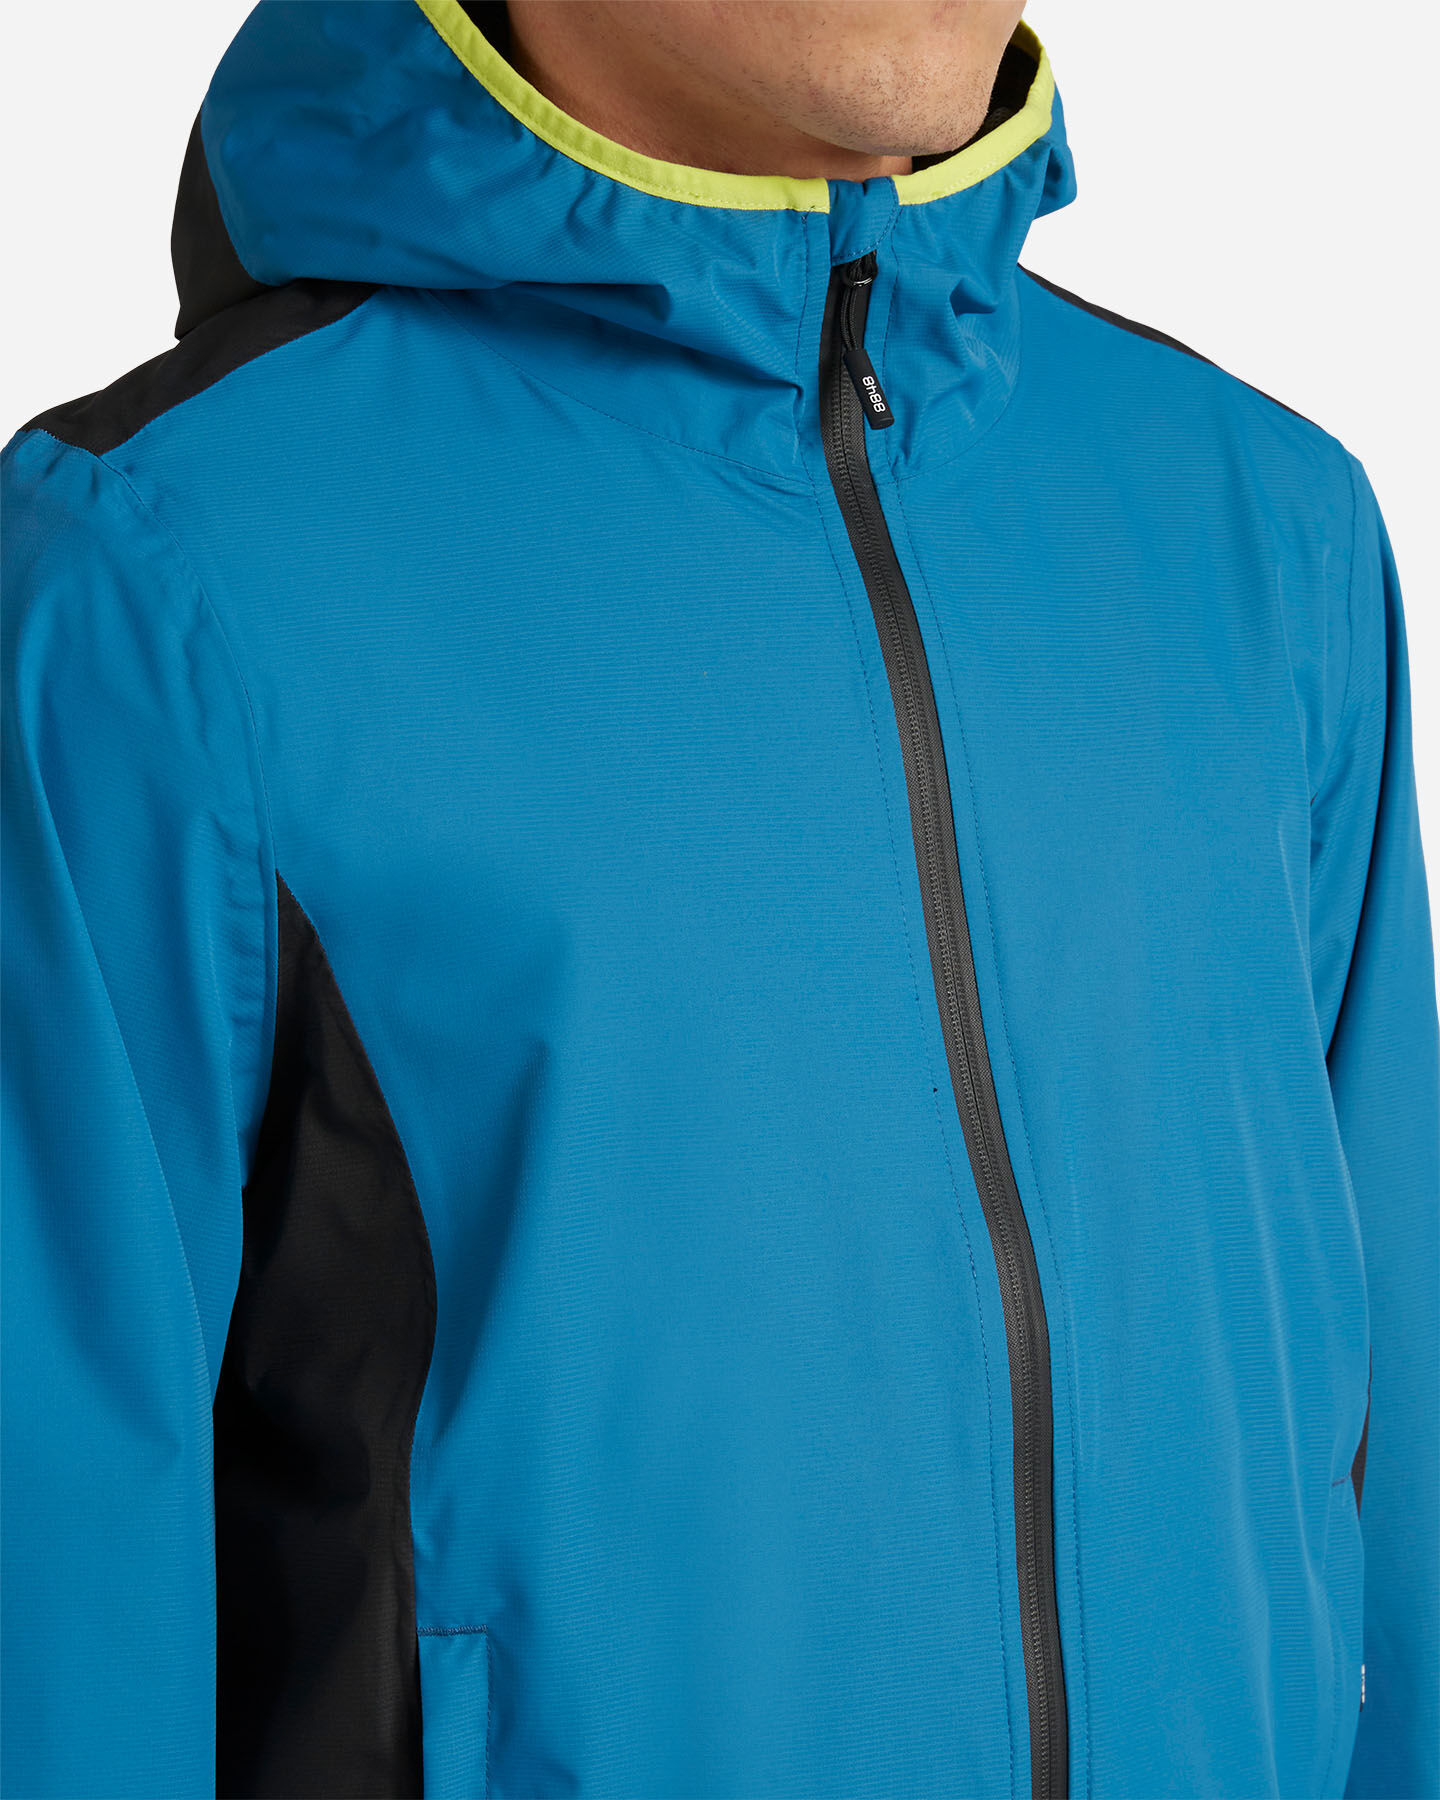  Giacca outdoor 8848 MOUNTAIN HIKE M S4120744|555/050|XXL scatto 4